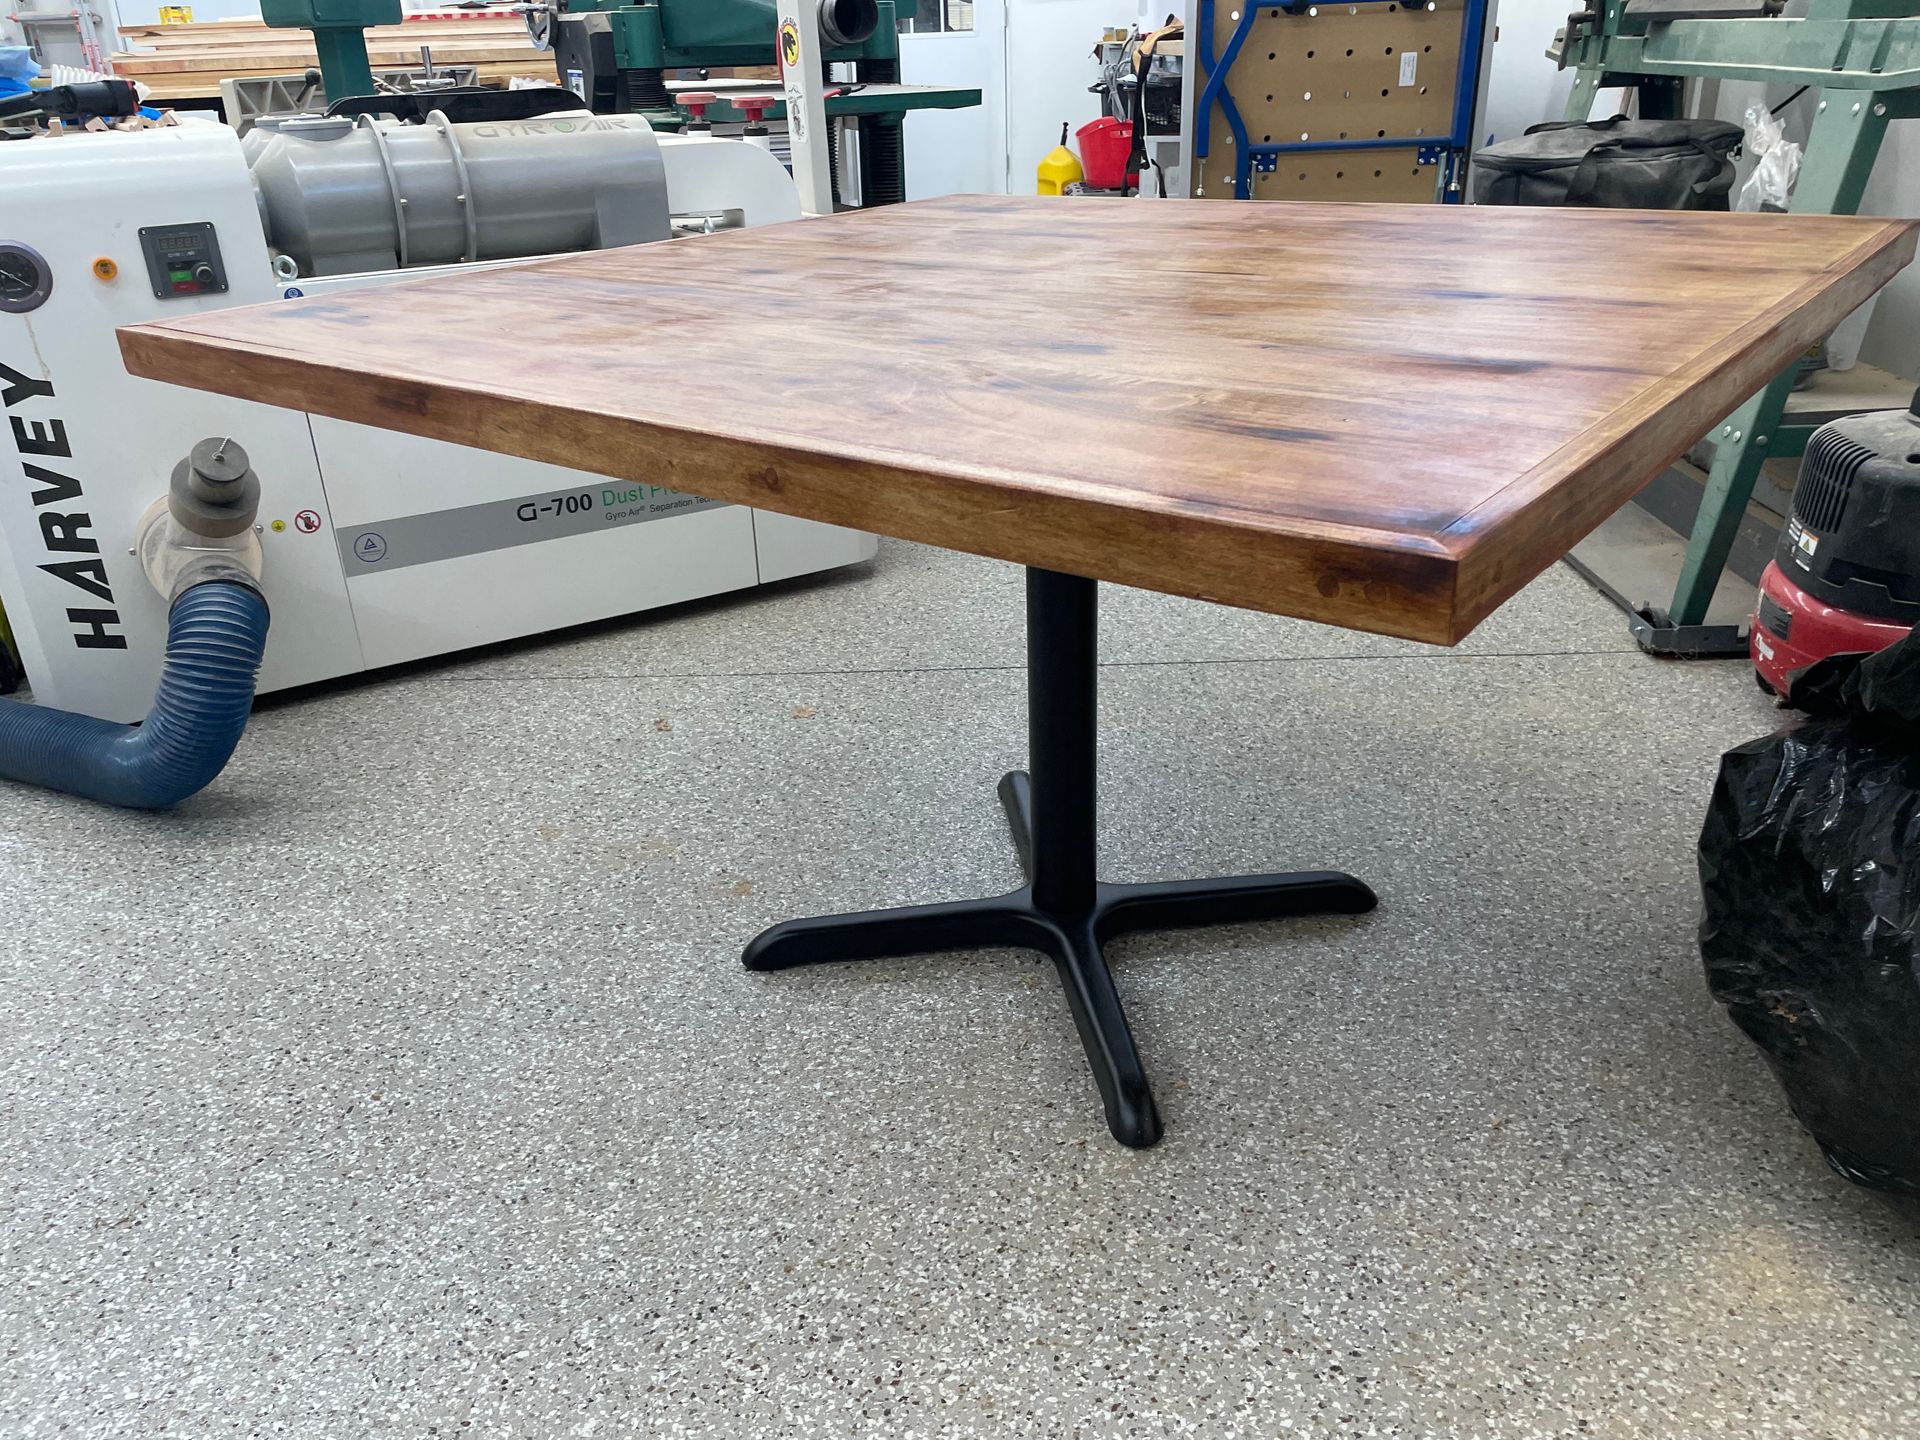 A wooden table is sitting in a garage next to a machine.